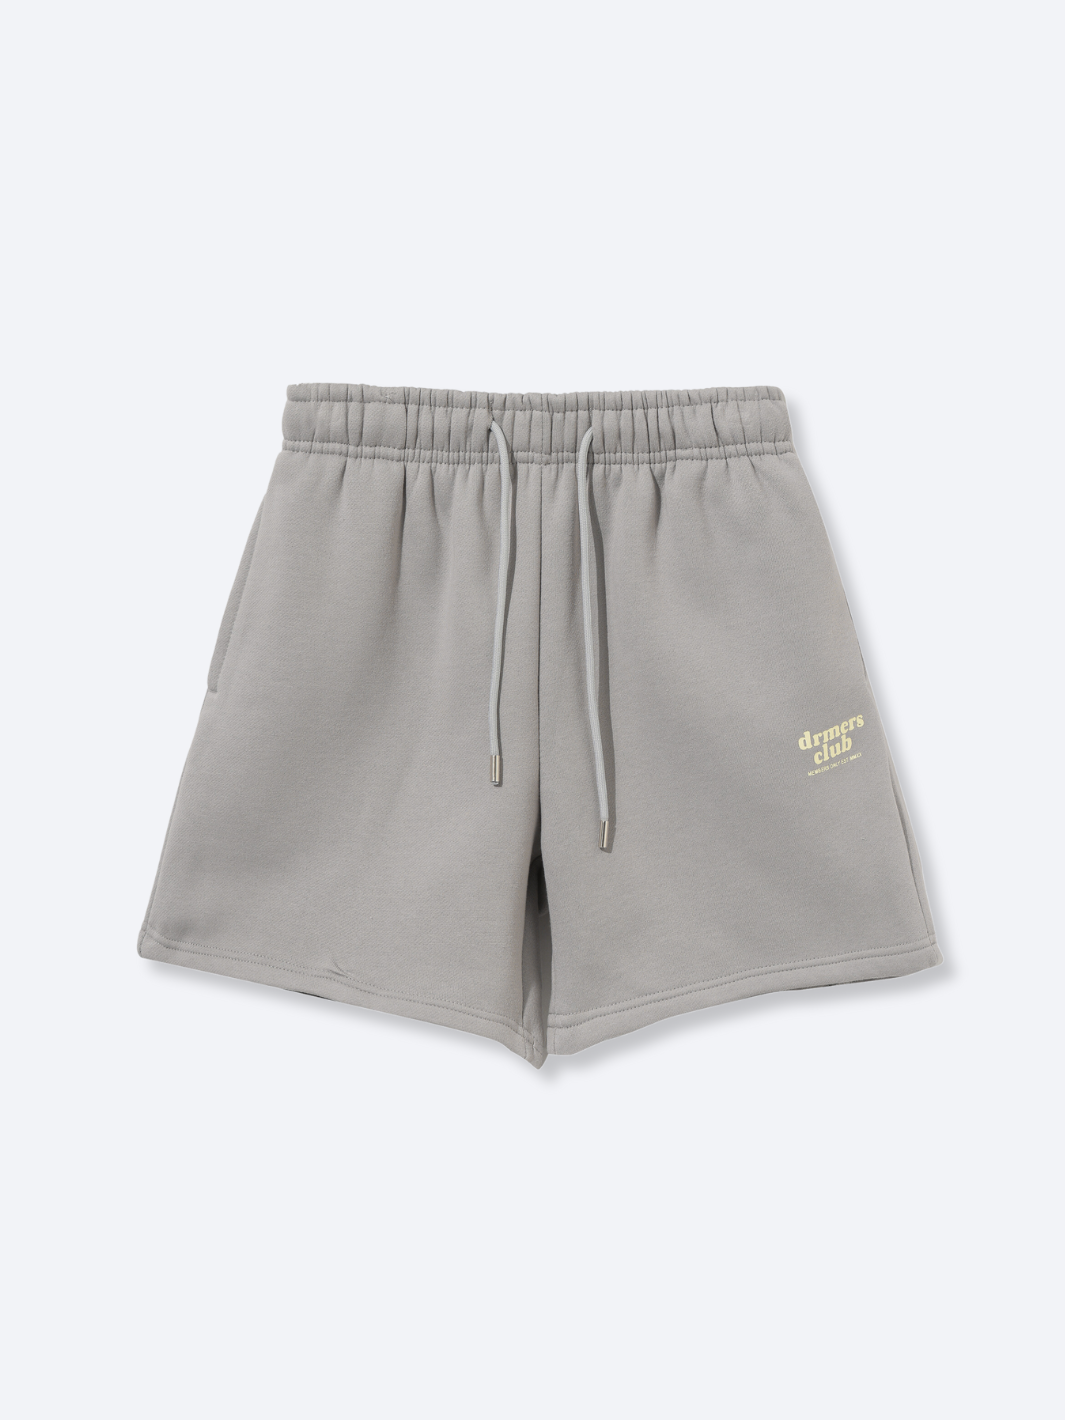 members only sweat shorts - stone grey